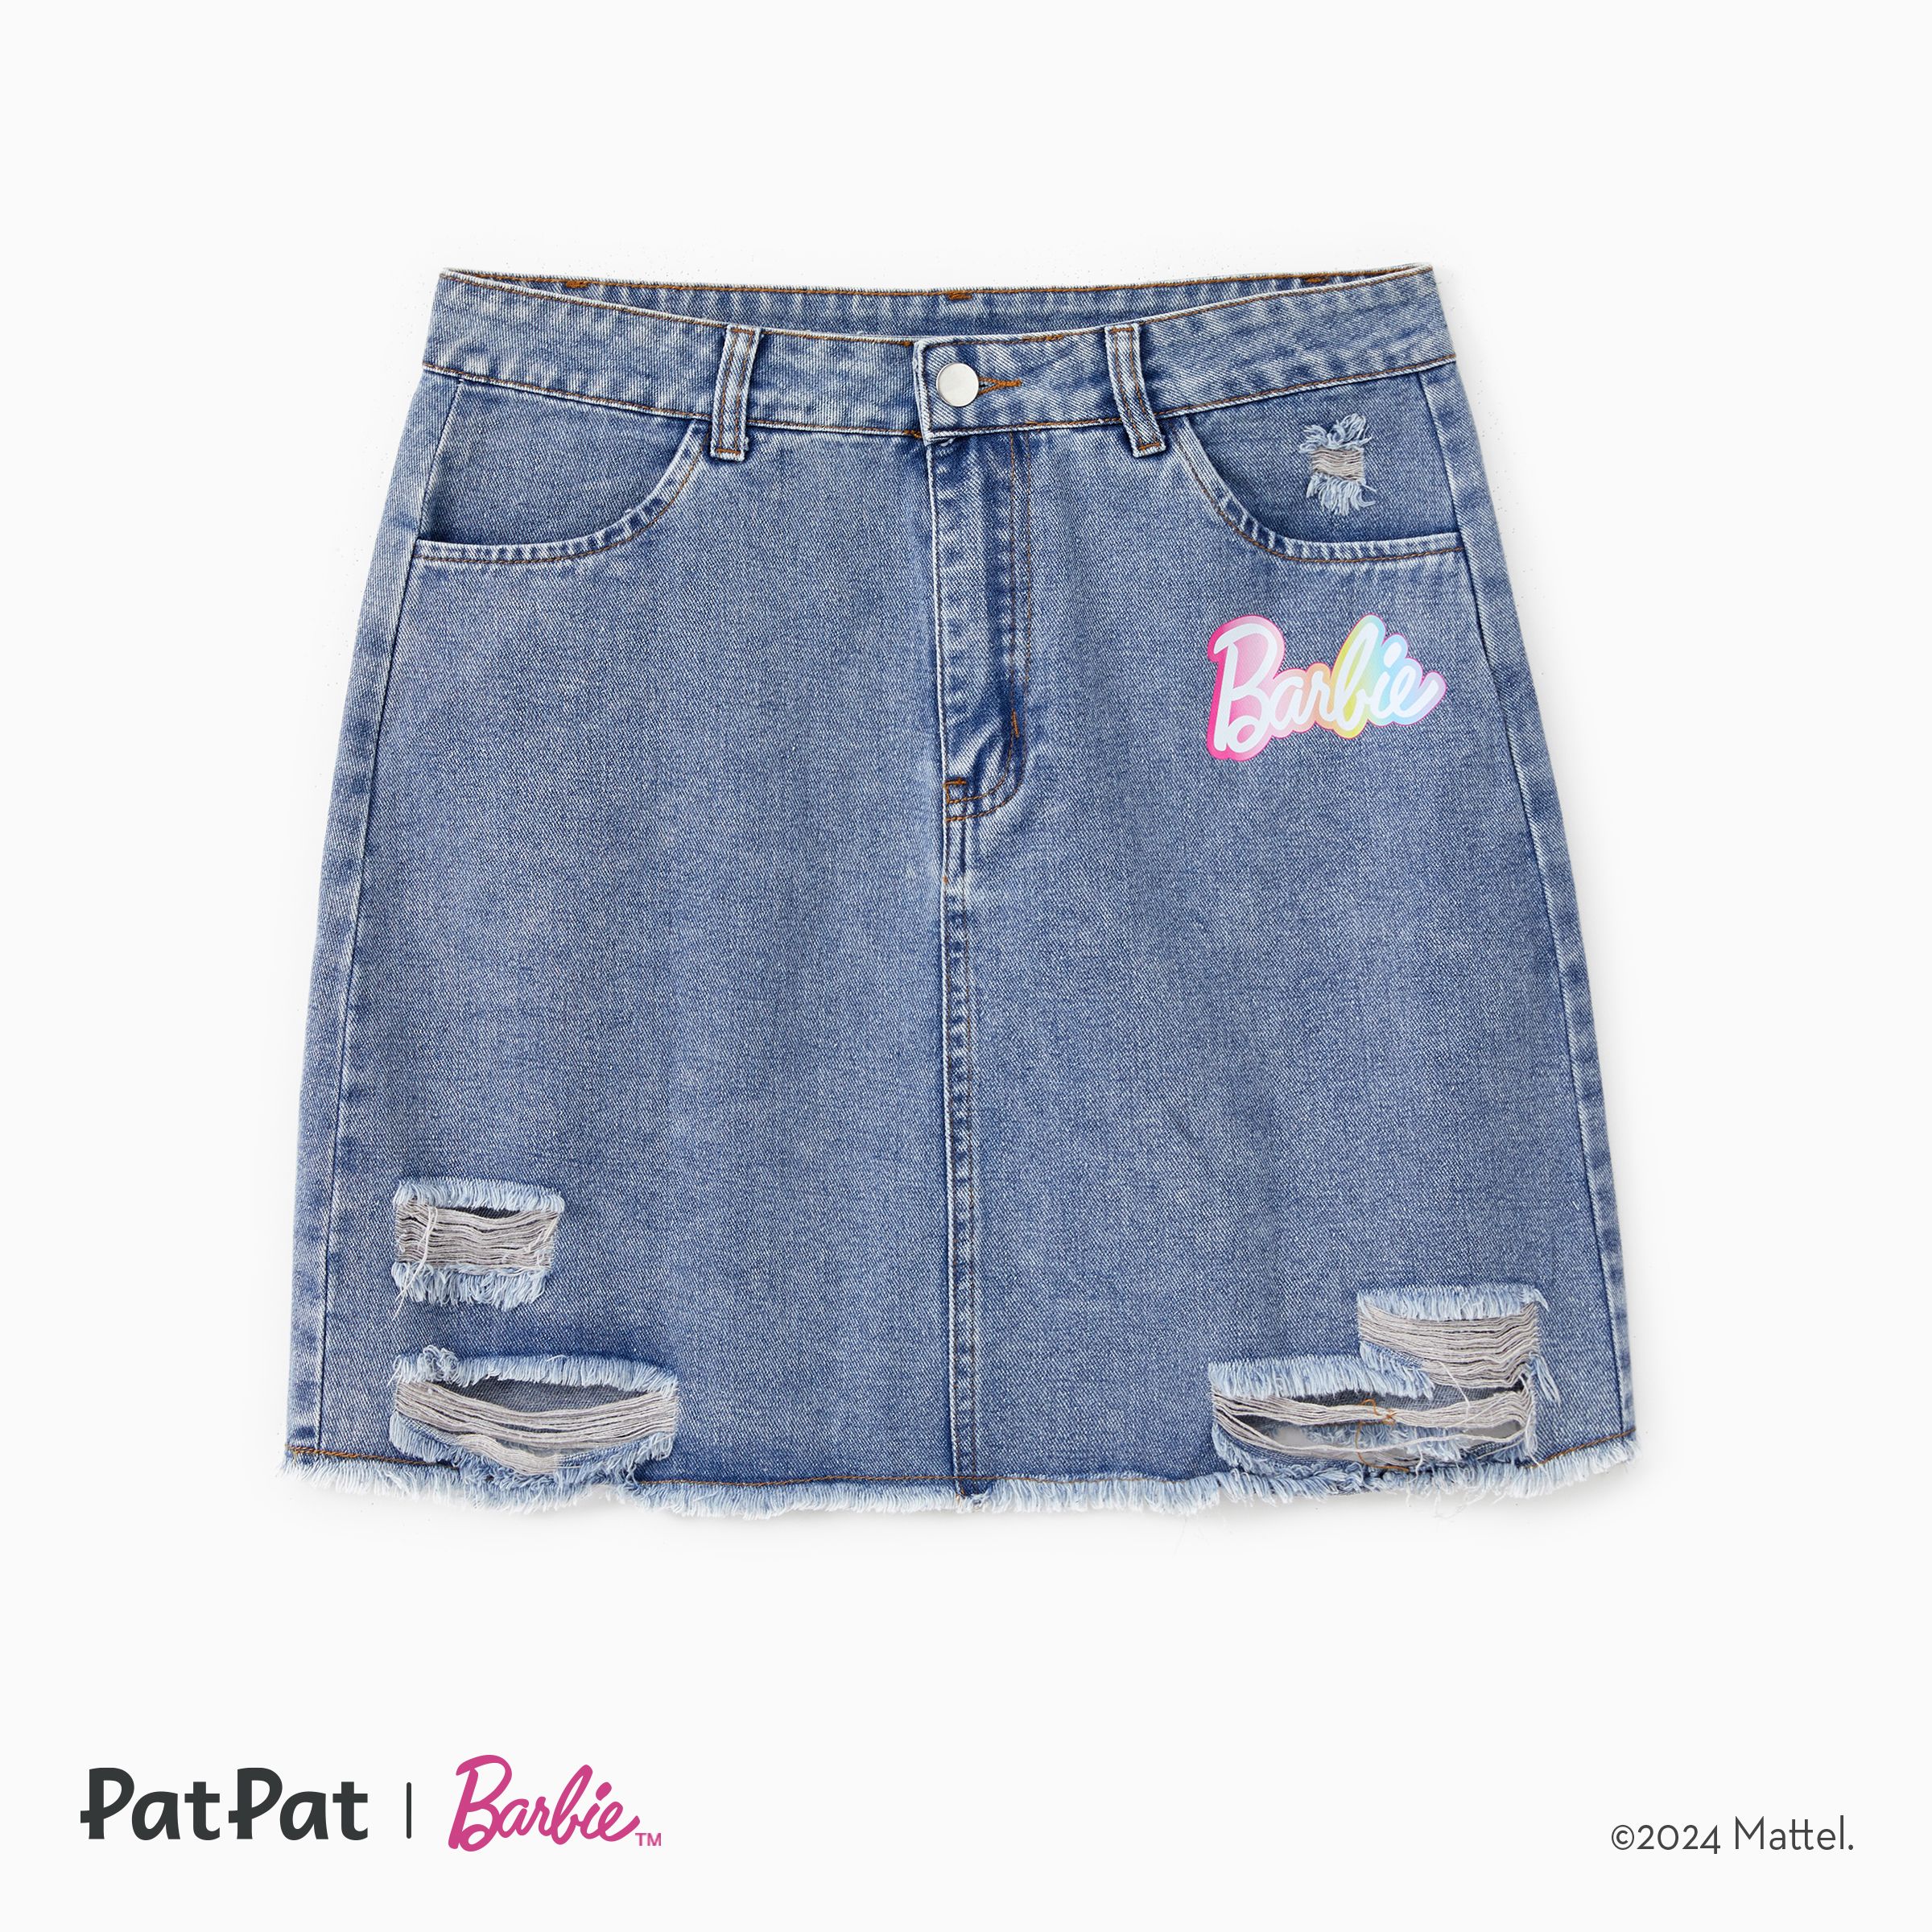 Barbie Mommy and Me Colorful Classic Letter Logo Print Denim Skirt